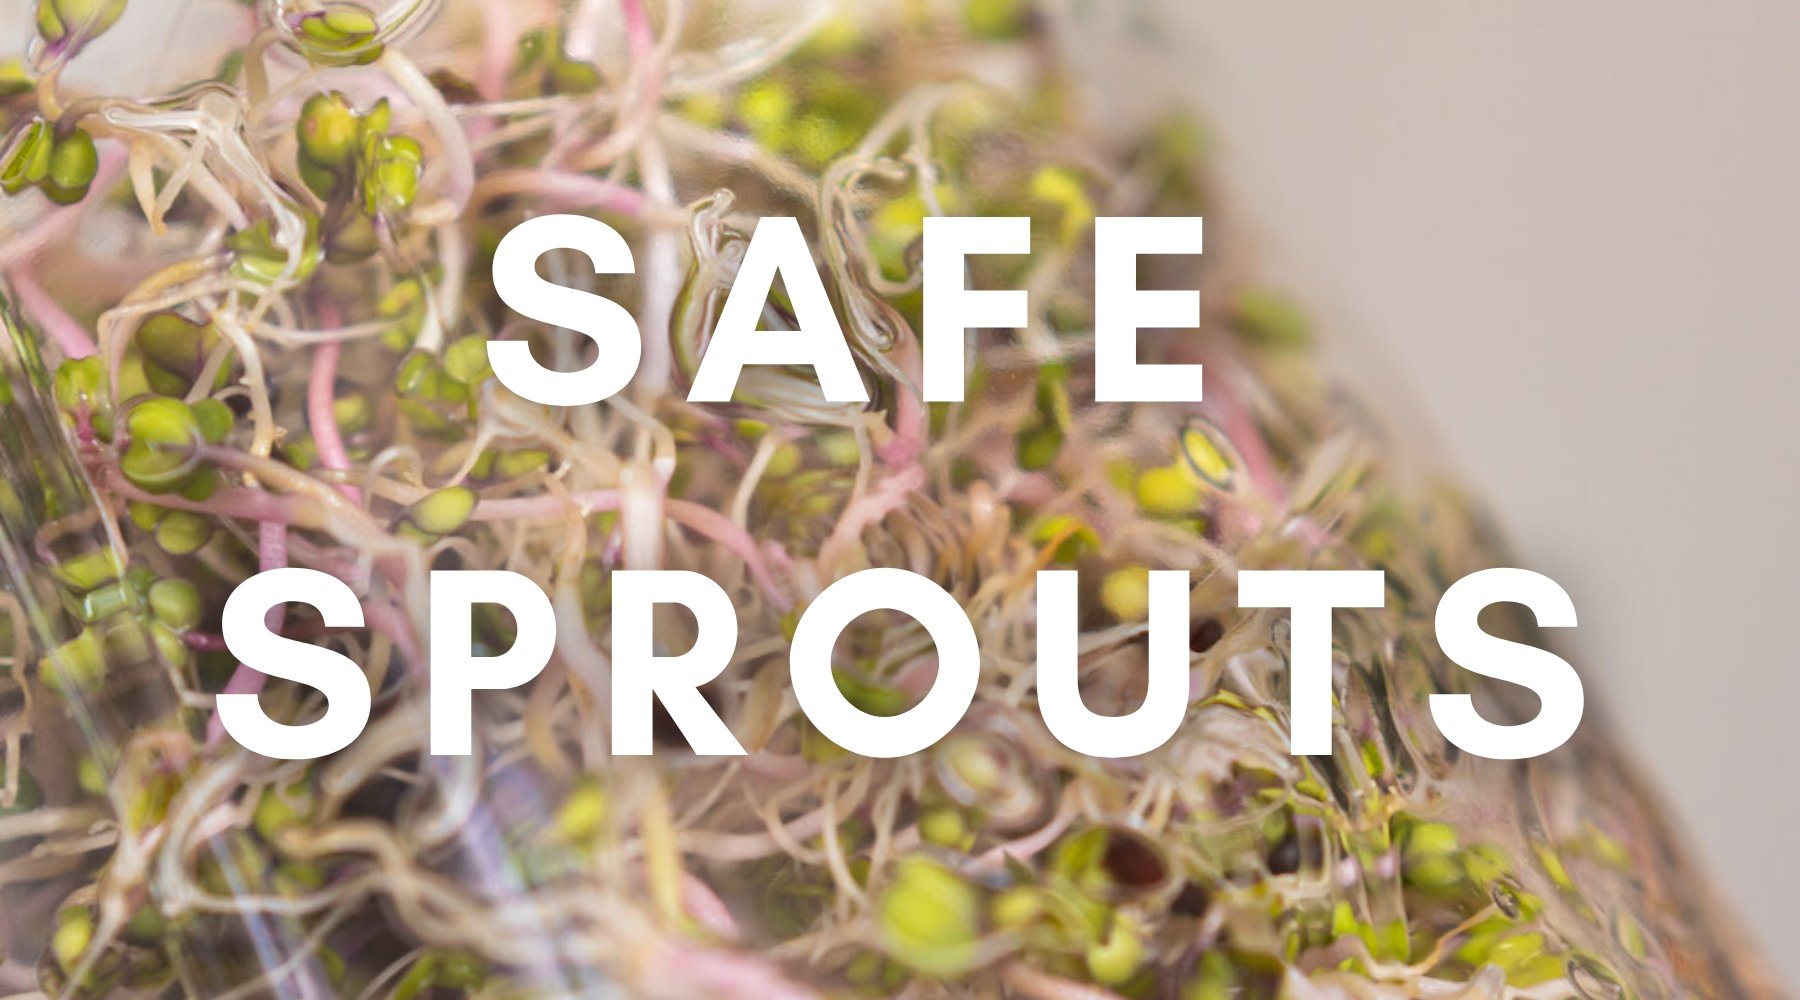 sprouts grown safely 